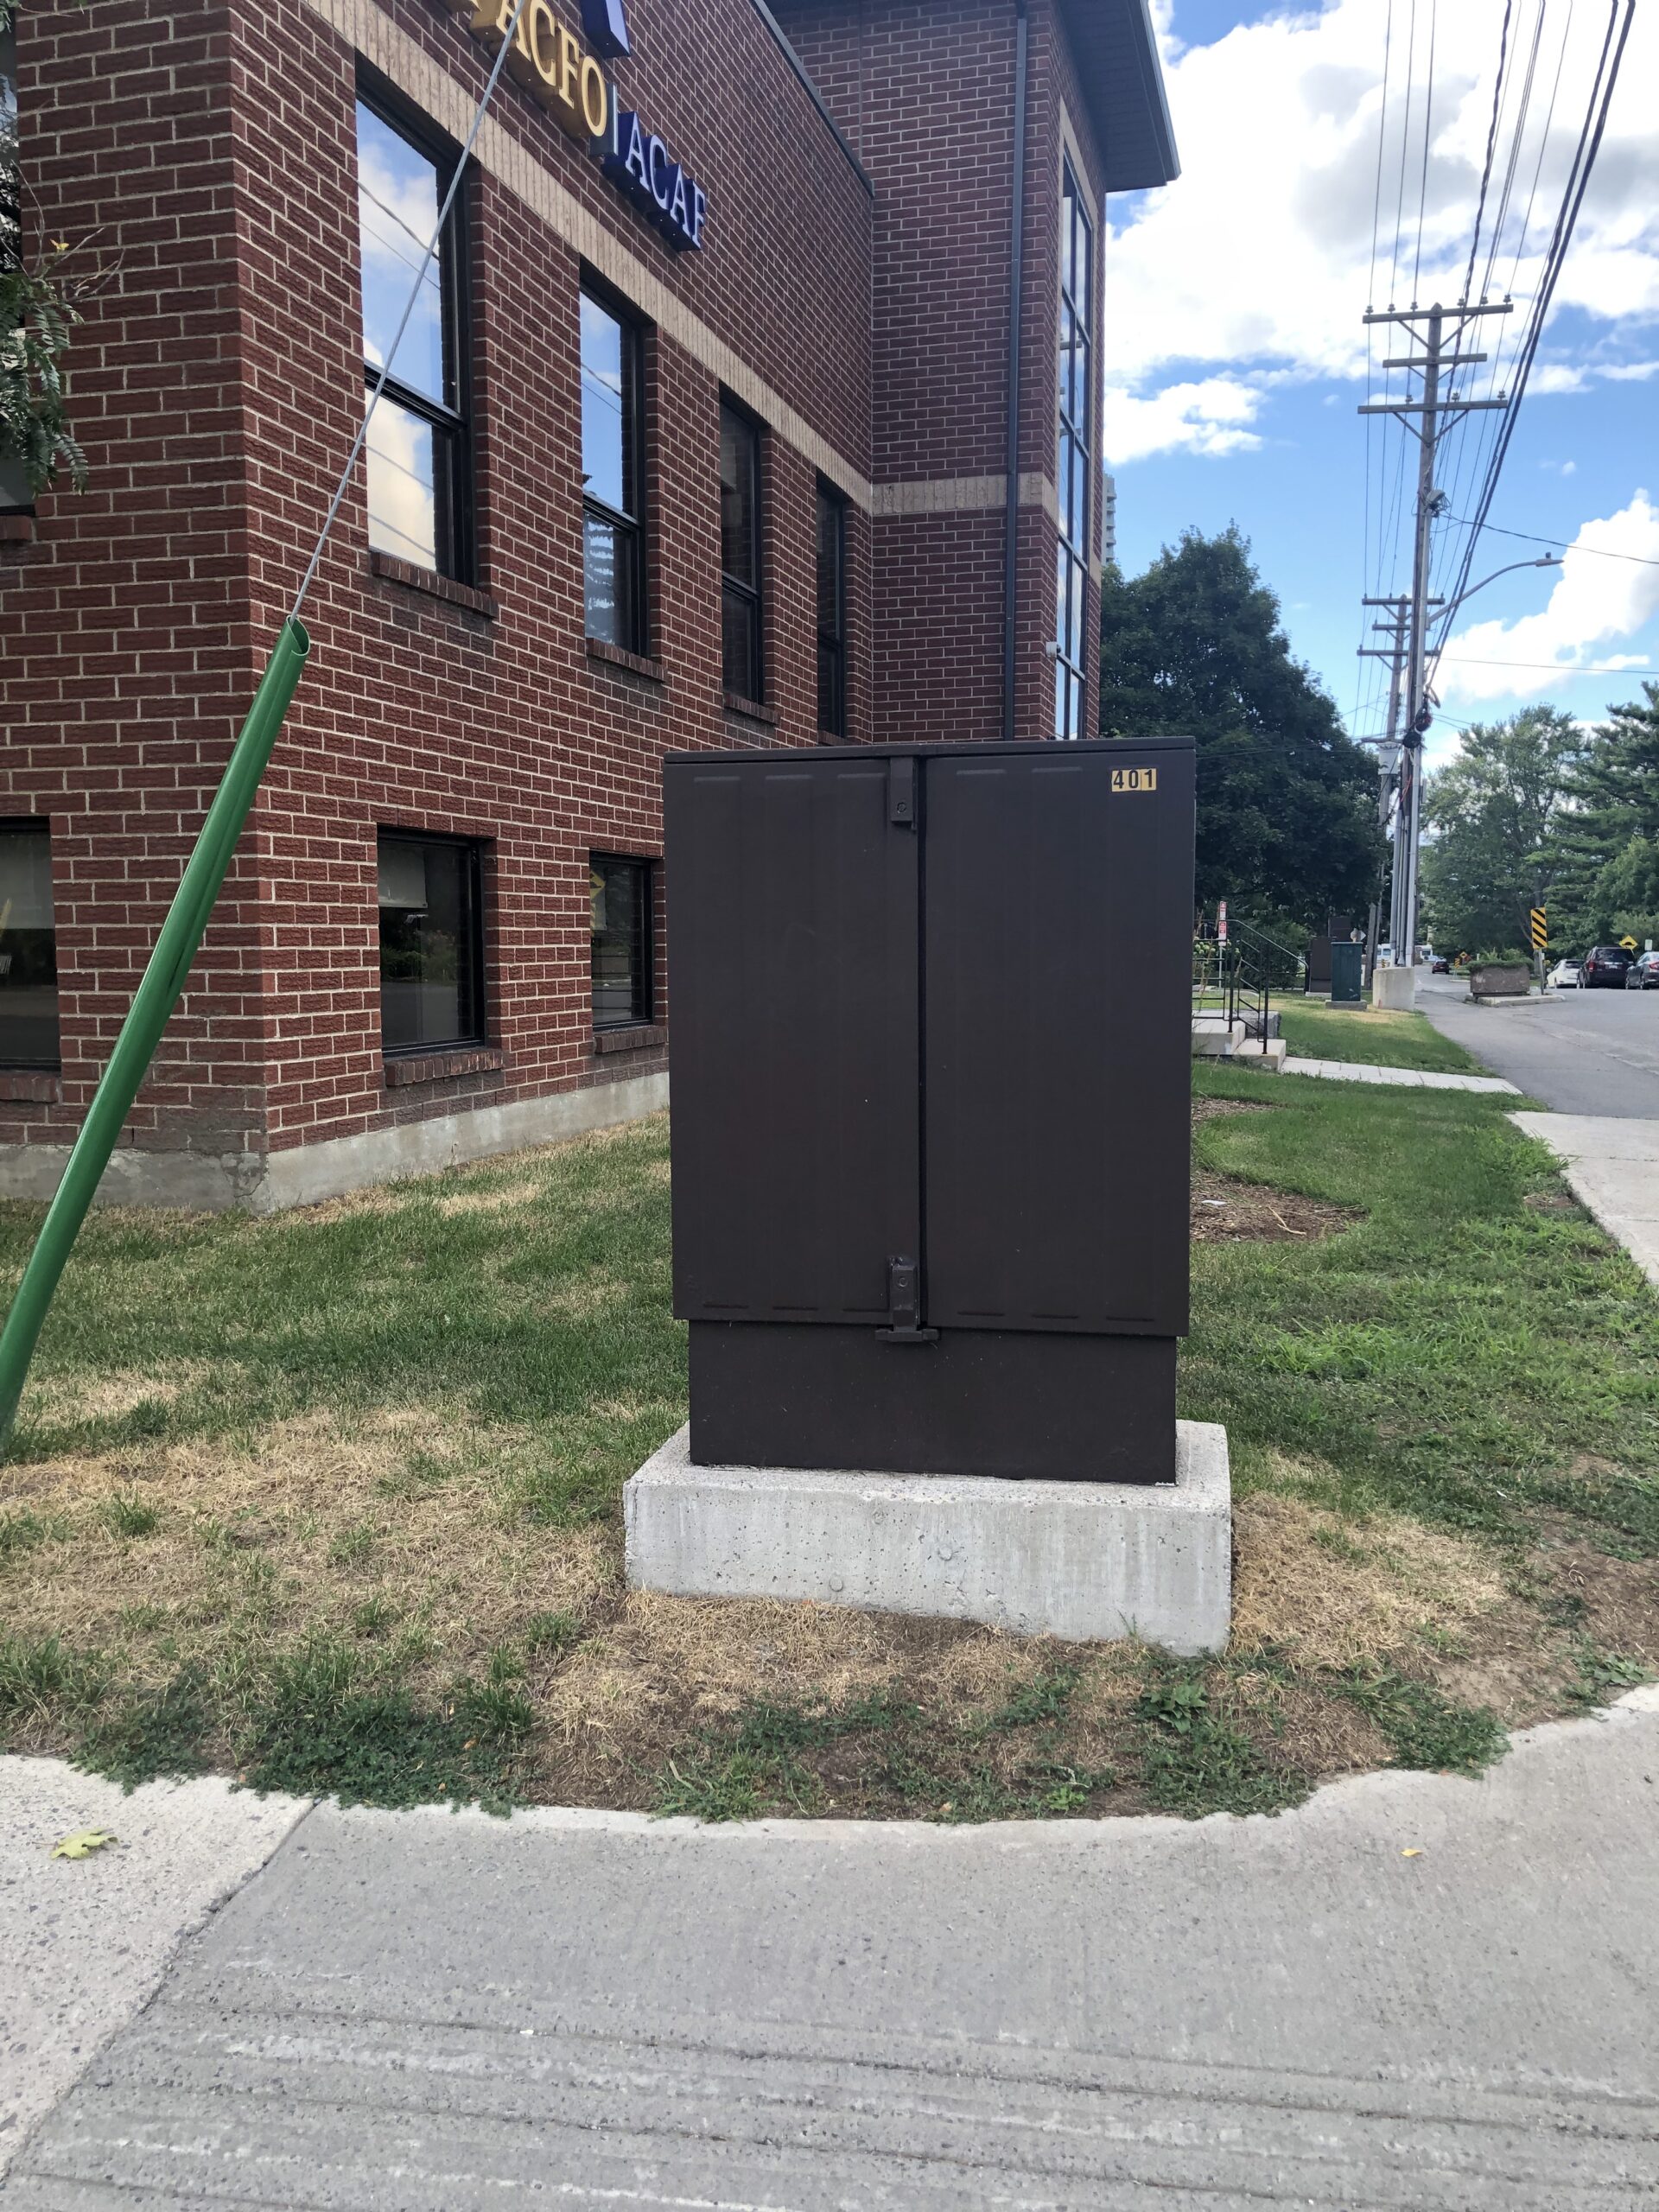 A tall slim utility box on a concrete base at the corner of two roads